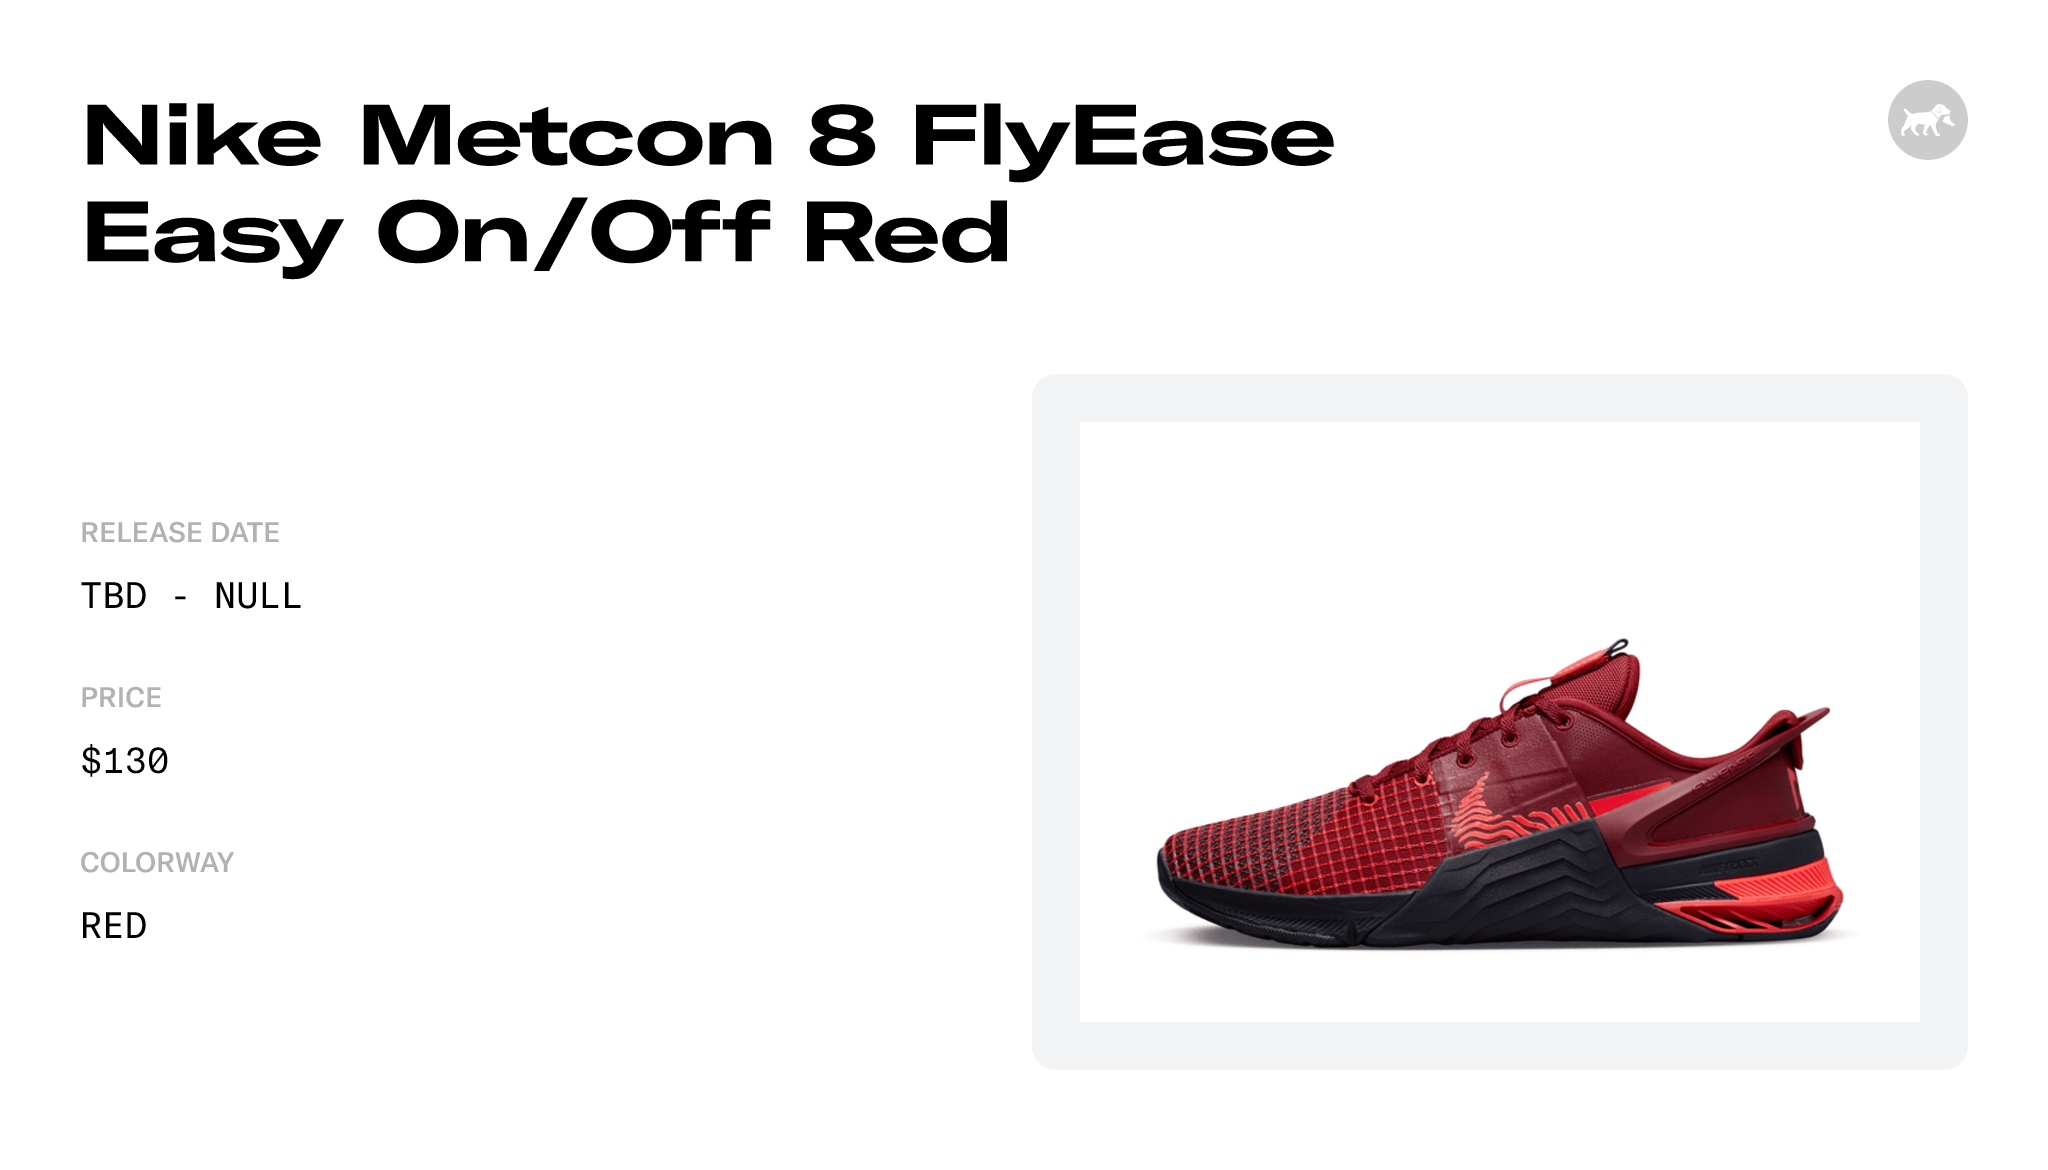 Nike Metcon 8 FlyEase Easy On/Off Red - DO9388-600 Raffles and Release Date